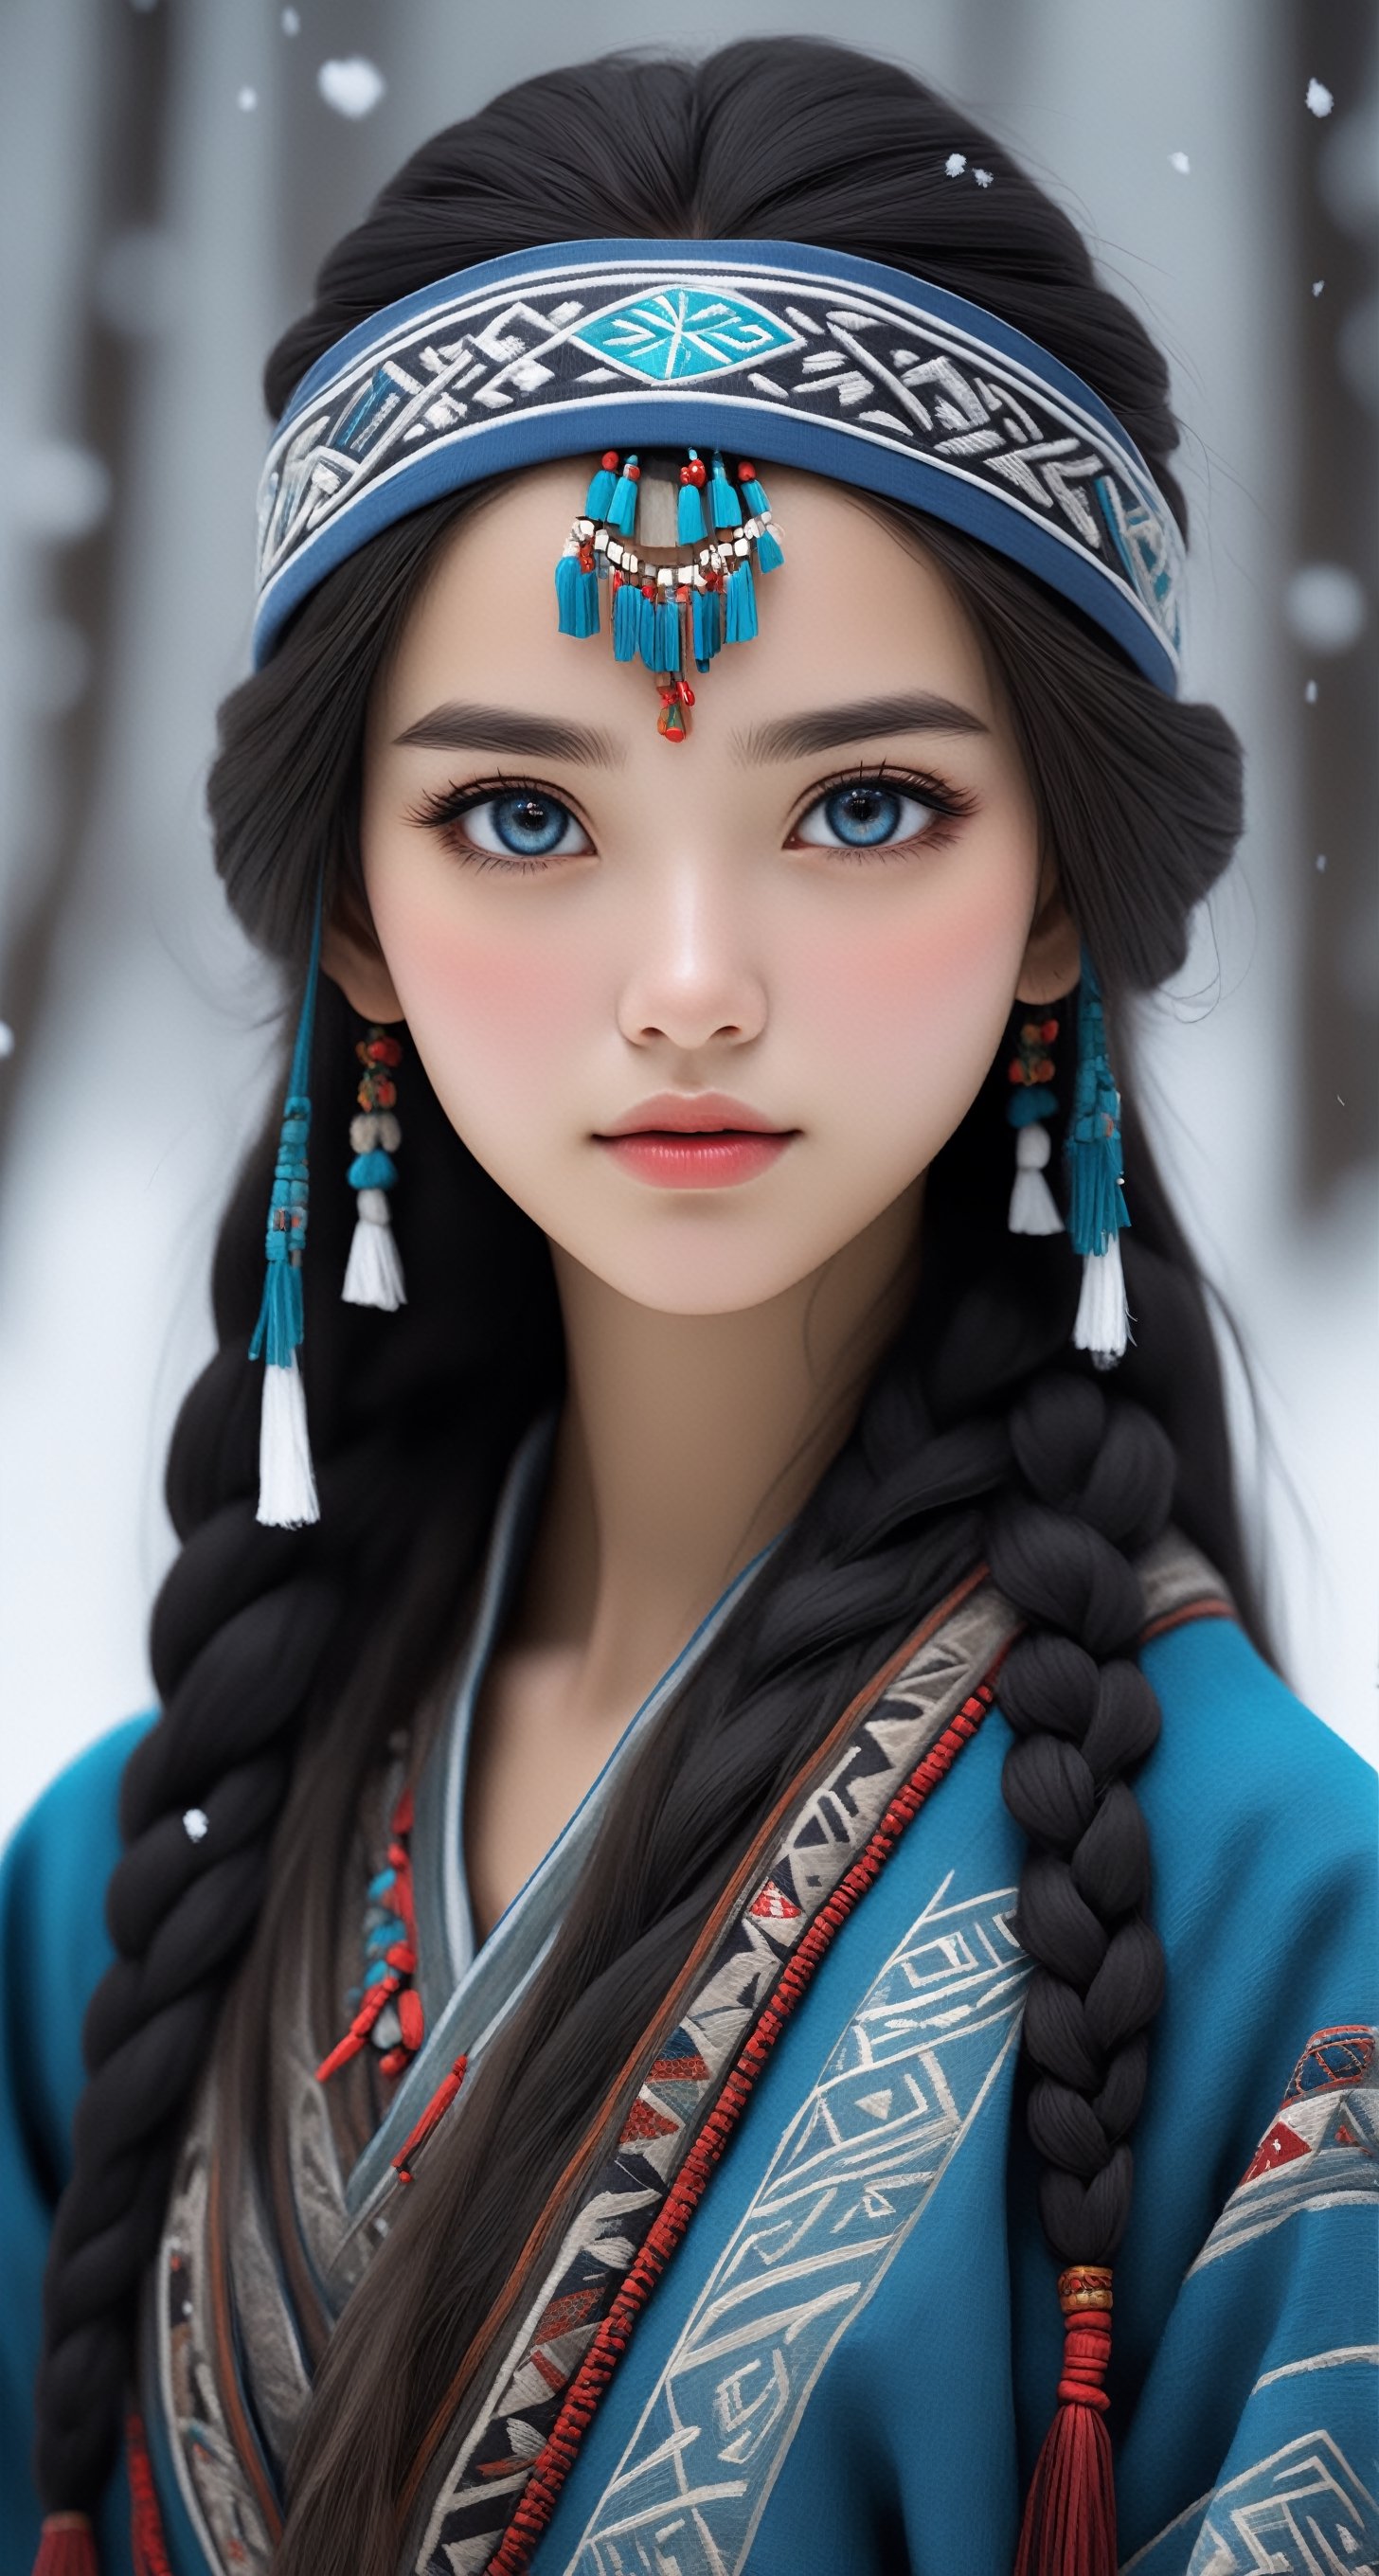 Realistic,full BODY,
Create an image depicting a beautiful girl wearing old traditional Ainu clothing,Russian a Siberian indigenous girl,long black straight hair,
Shabby threadbare worn-out clothes,beautiful crystal blue eyes,almond eyes,arment called an 'attush' made from intricately woven fabric, adorned with intricate geometric patterns. She also wears a 'kaparamip' headband with decorative embroidery,The clothing is rich in earthy tones like black and skull, reds, and greens, reflecting a deep connection to nature,
The girl stands in a serene frost forest setting, 
Girl dancing in the snow,